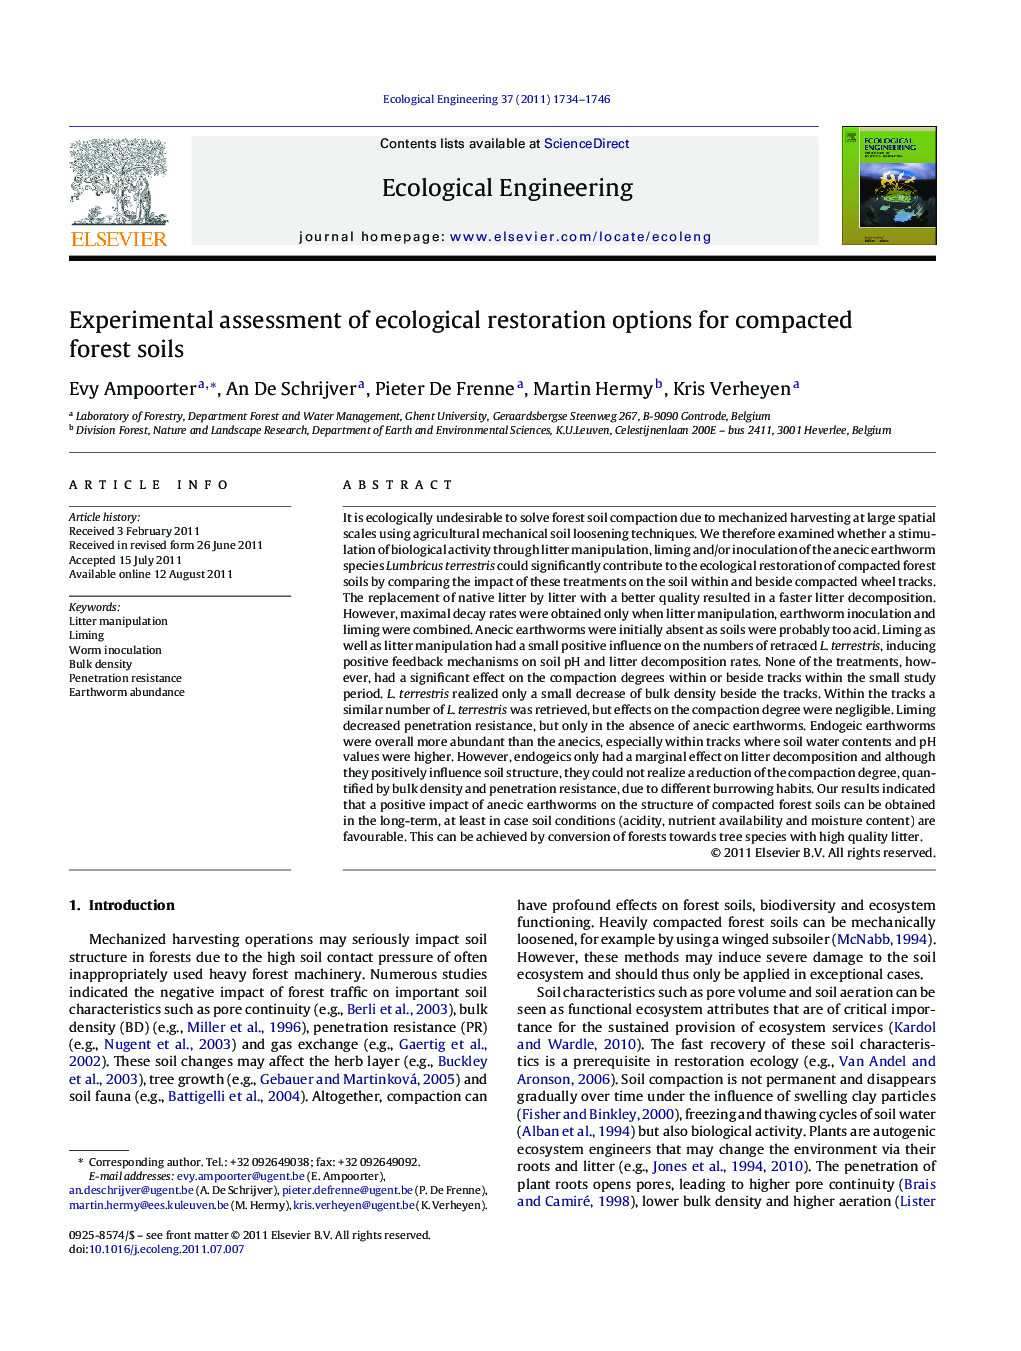 Experimental assessment of ecological restoration options for compacted forest soils